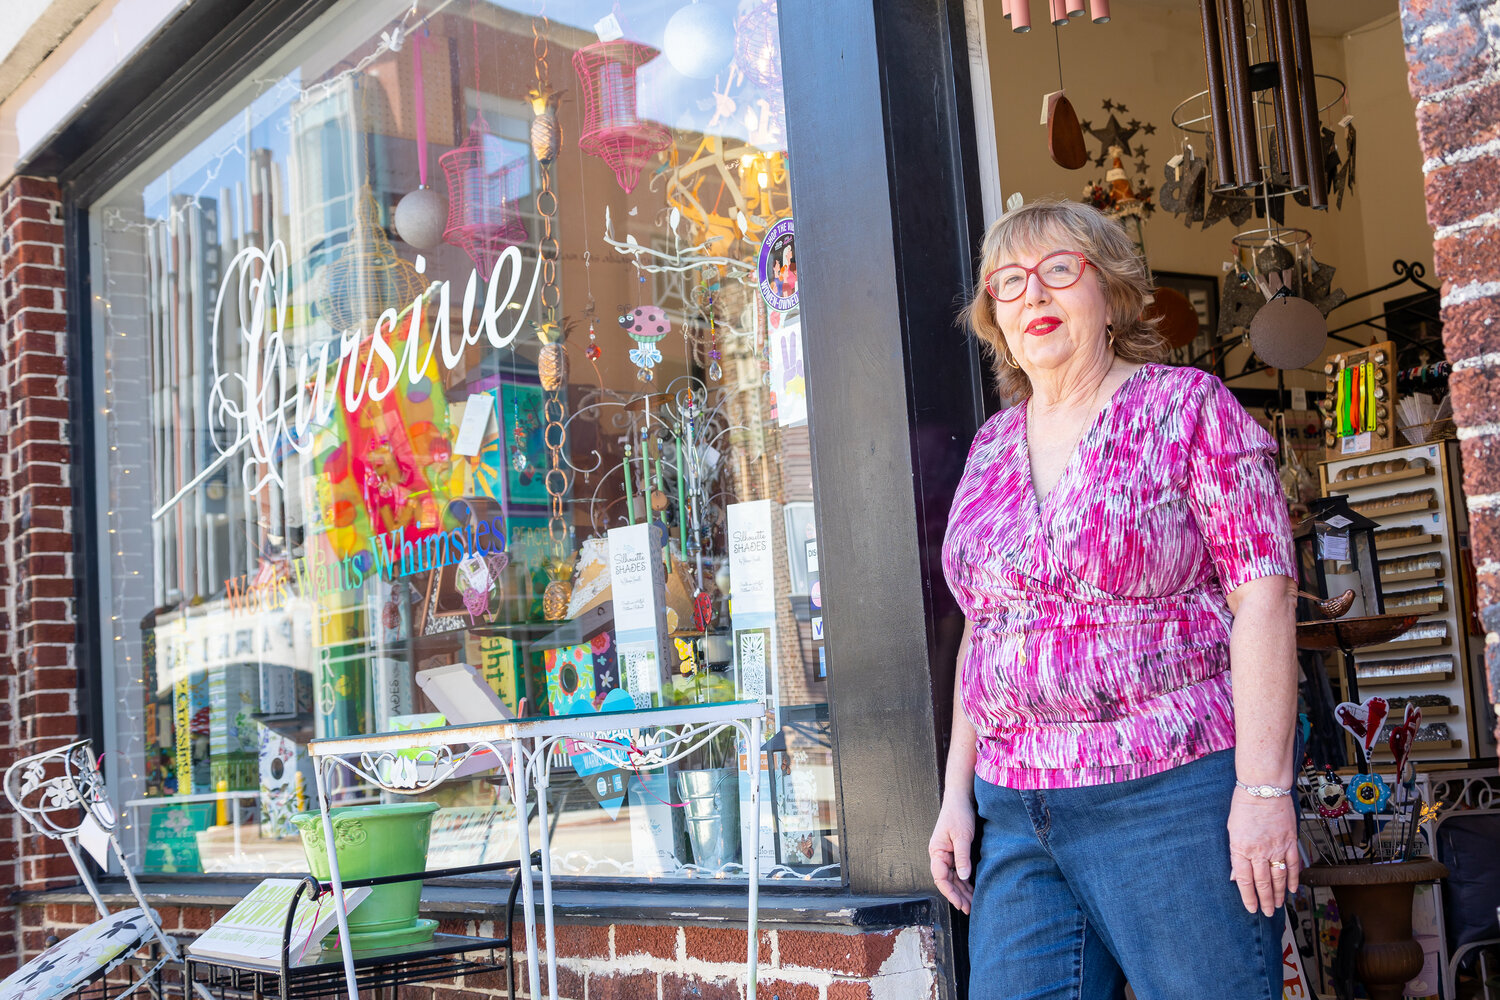 Arnold renamed her store at 223 Franklin St. to Cursive last year.